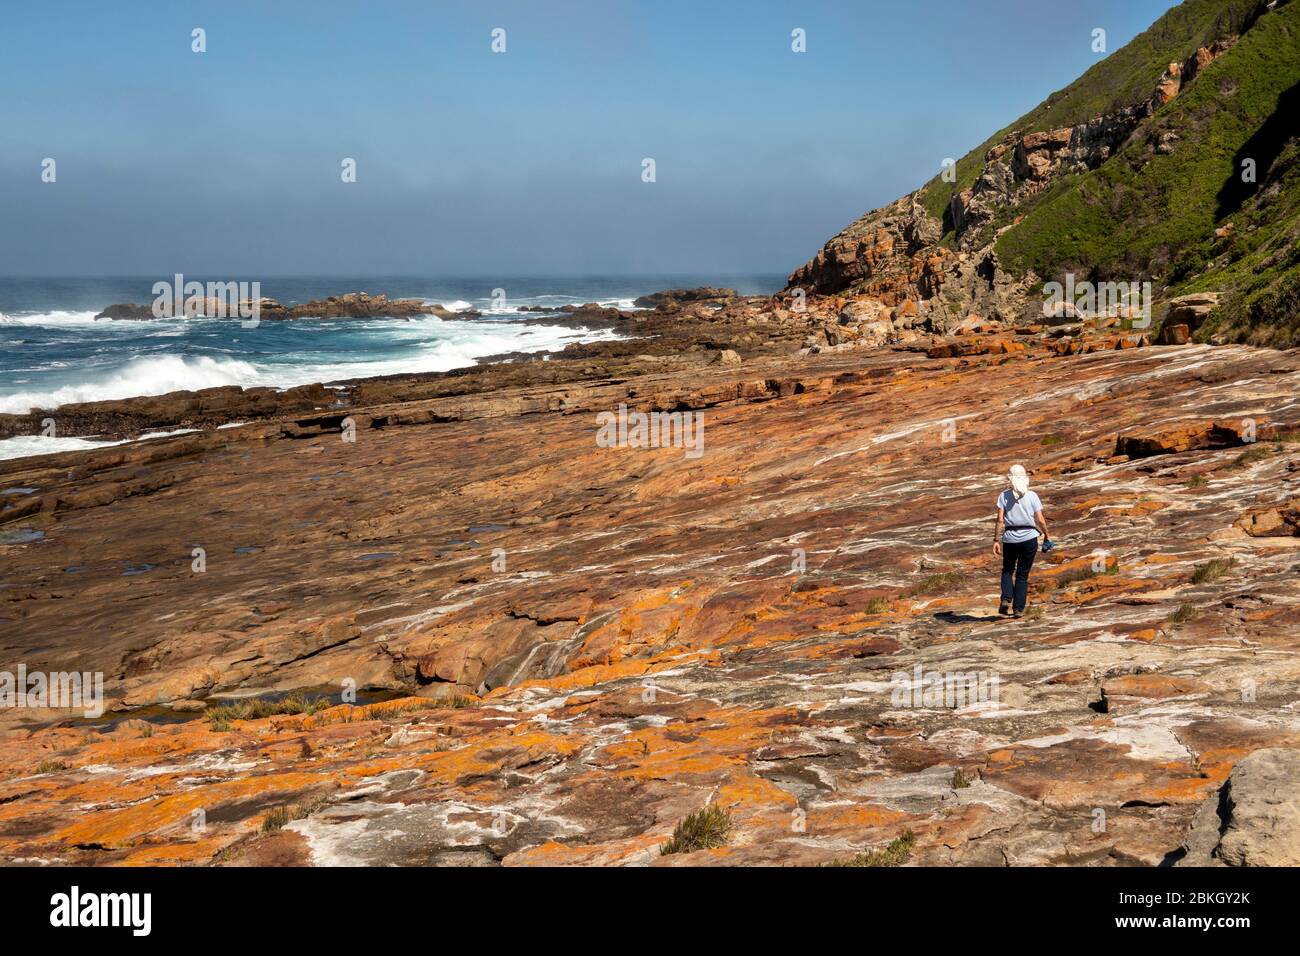 South Africa, Western Cape, Plettenberg Bay, Robberg Nature Reserve, Cape Seal, tourist on rocky path above coastline with heavy sea Stock Photo